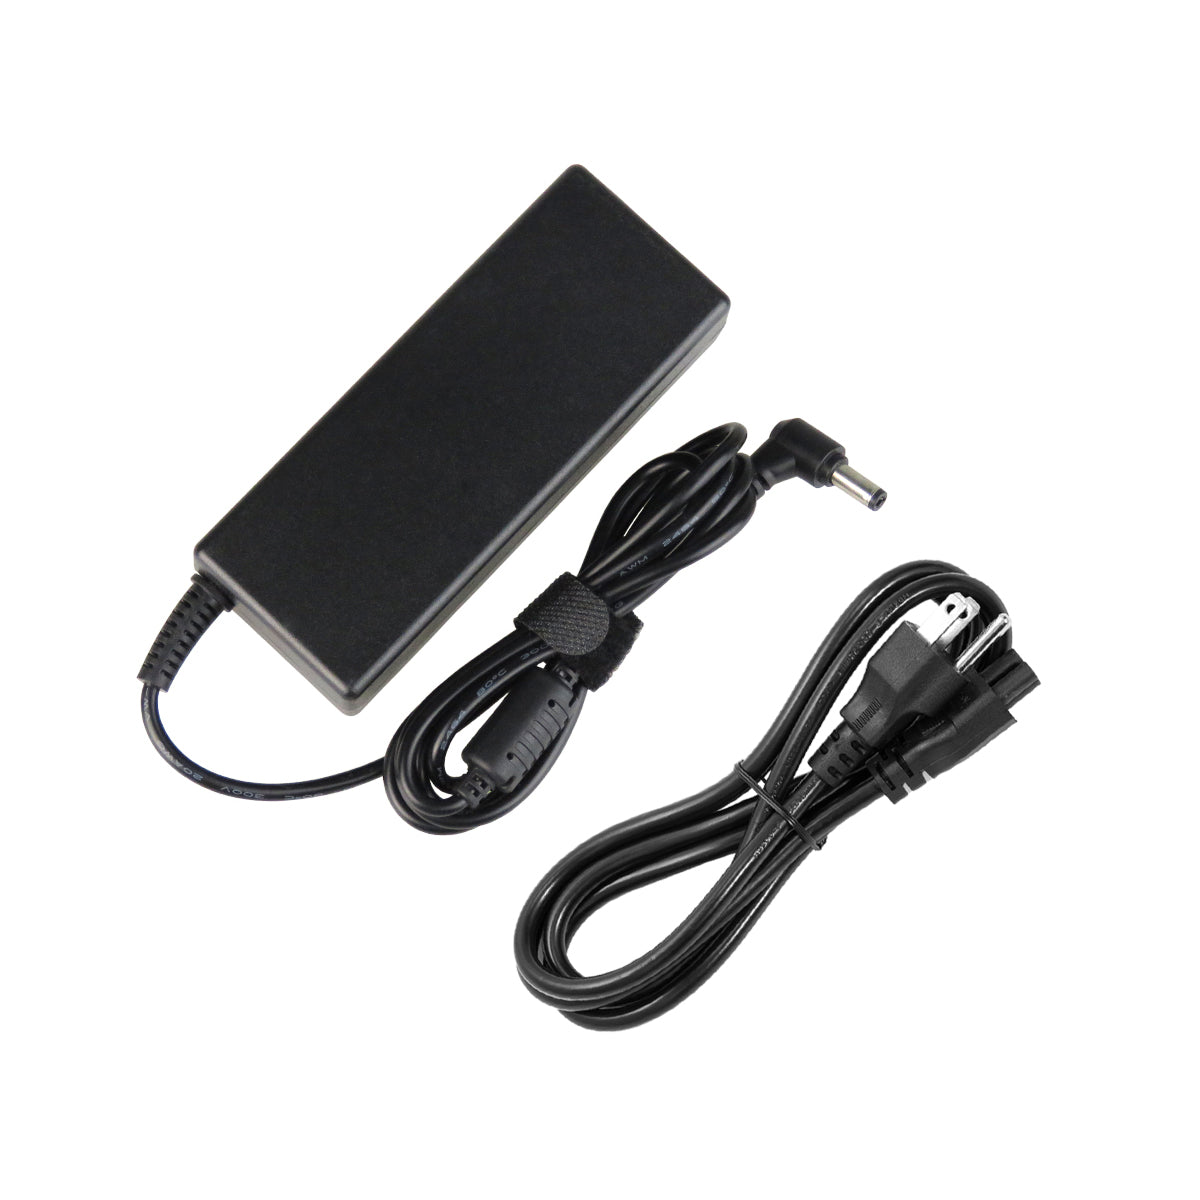 AC Adapter Charger for ASUS A55 Notebook.